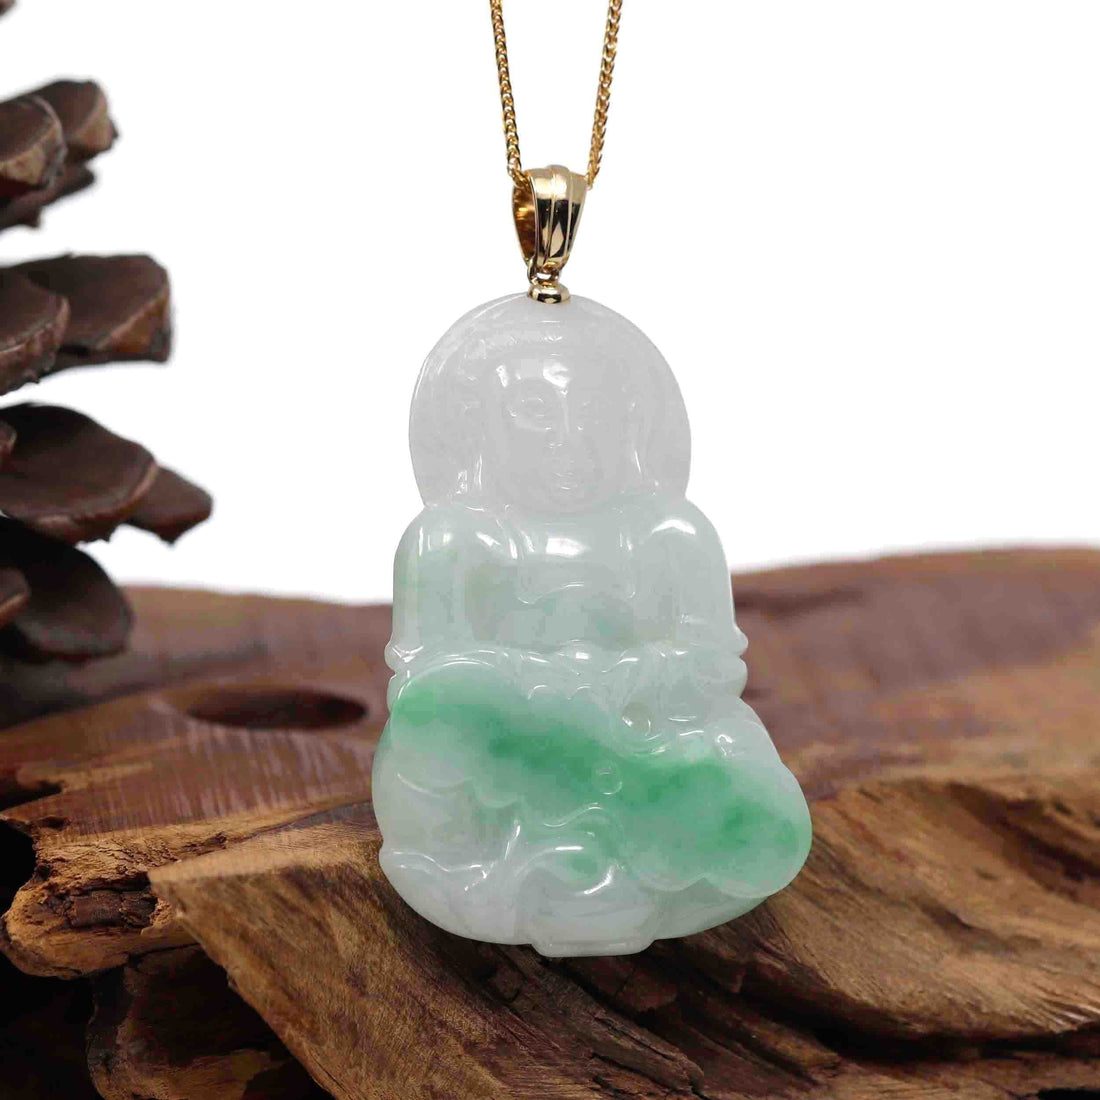 Baikalla Jewelry Jade Guanyin Pendant Necklace Goddess of Compassion" 14k Yellow Gold Genuine Burmese Jadeite Jade Guanyin Necklace With Good Luck Design